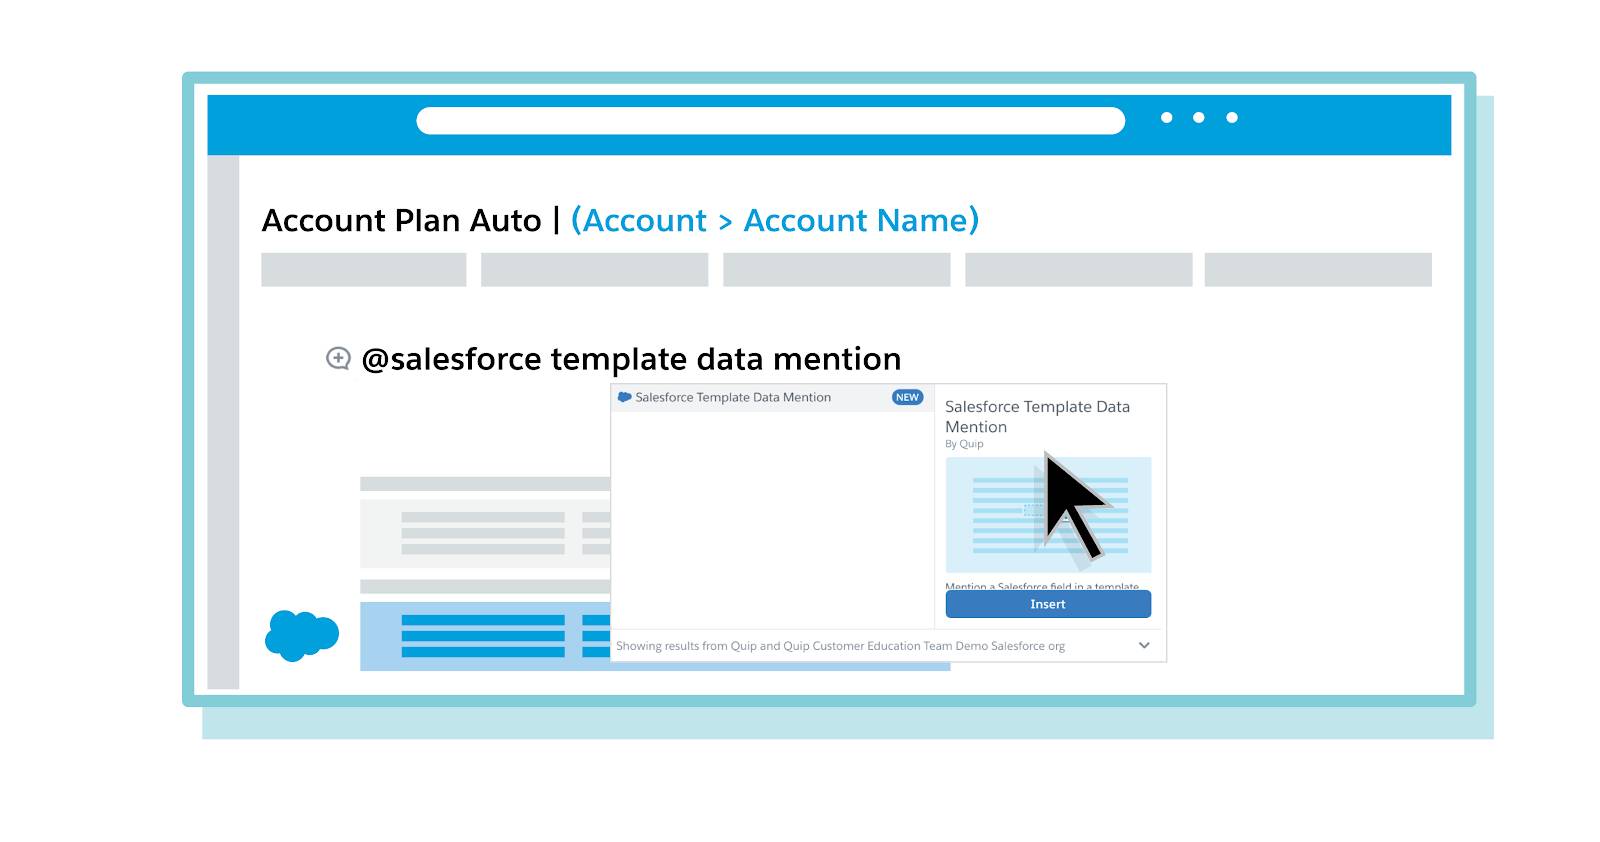 Account plan that shows (Account > Account Name) highlighted as Salesforce data, demonstrating a data mention. We see a menu of options coming from an @ mention.